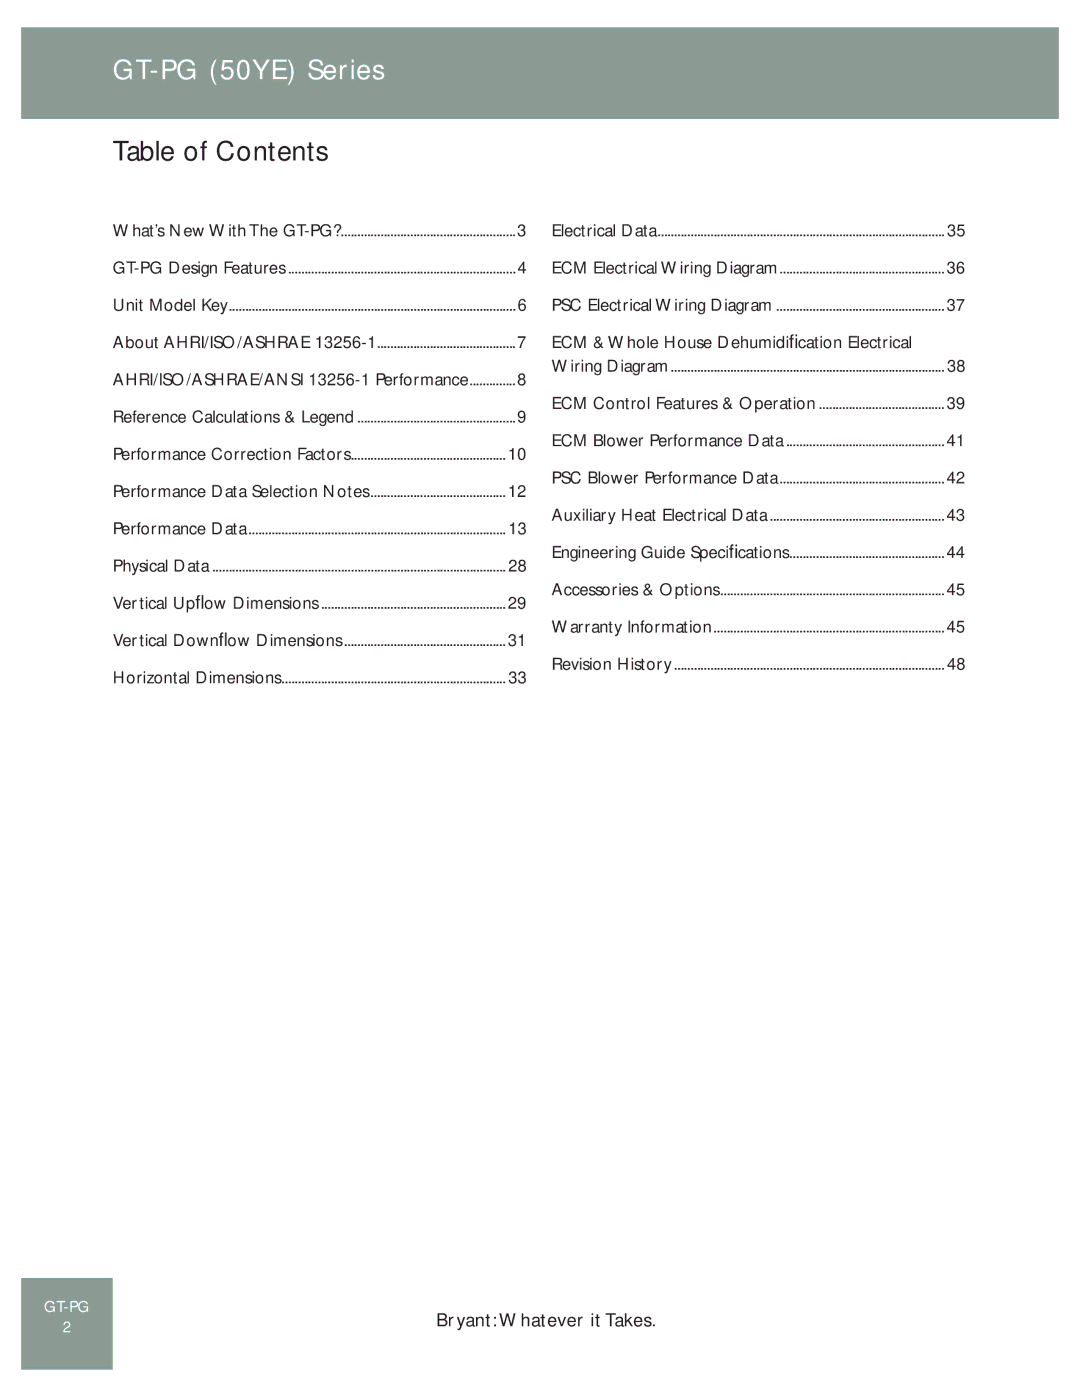 Bryant GT-PG (50YE) manual GT-PG 50YE Series, Table of Contents 